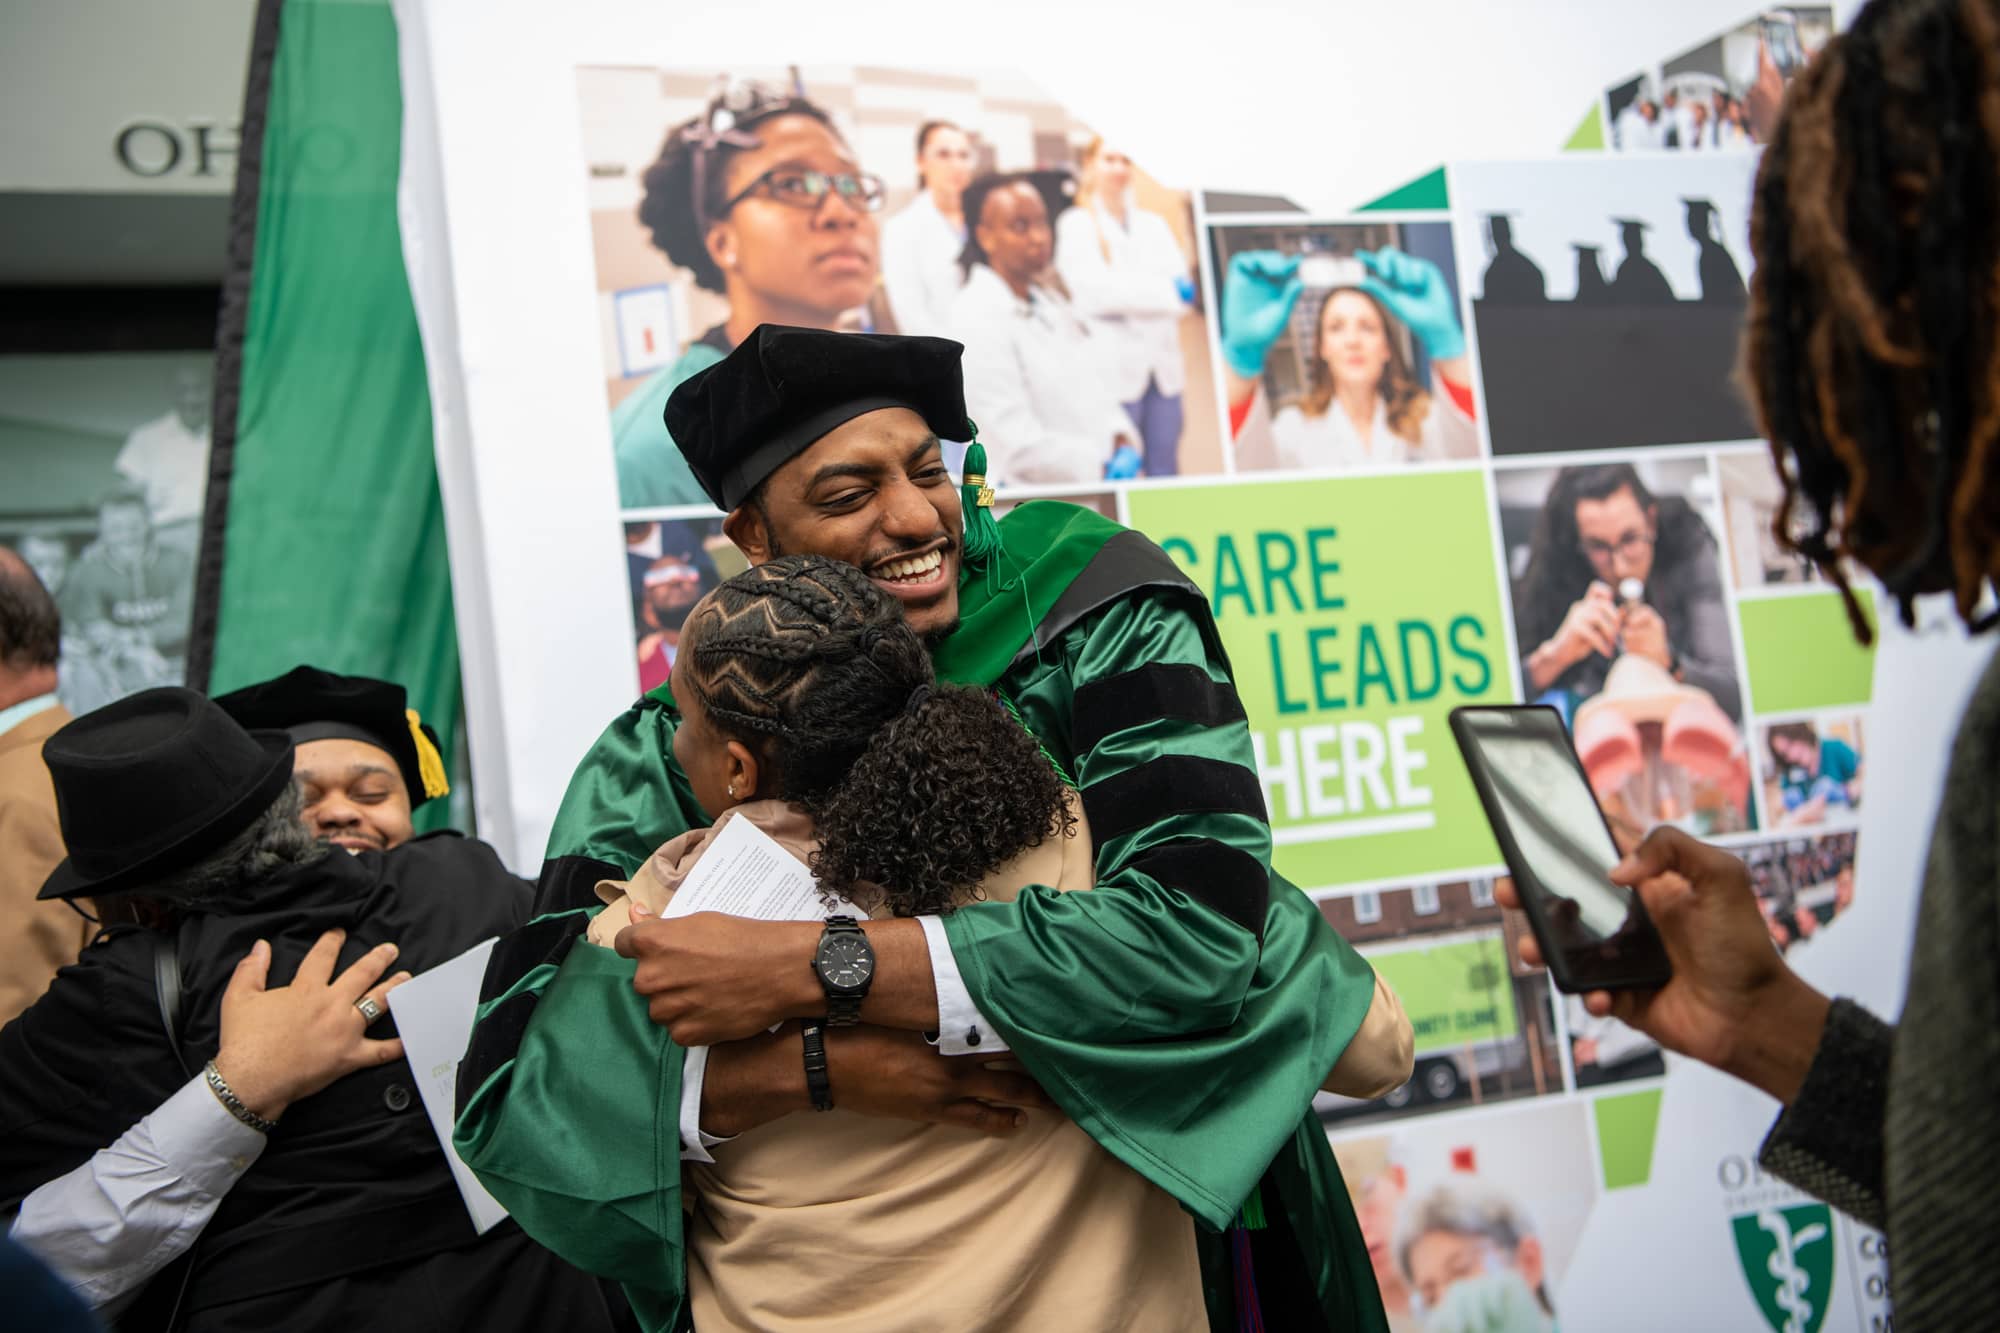 Dr. Marcus Lowe is congratulated by supporters following HCOM commencement.